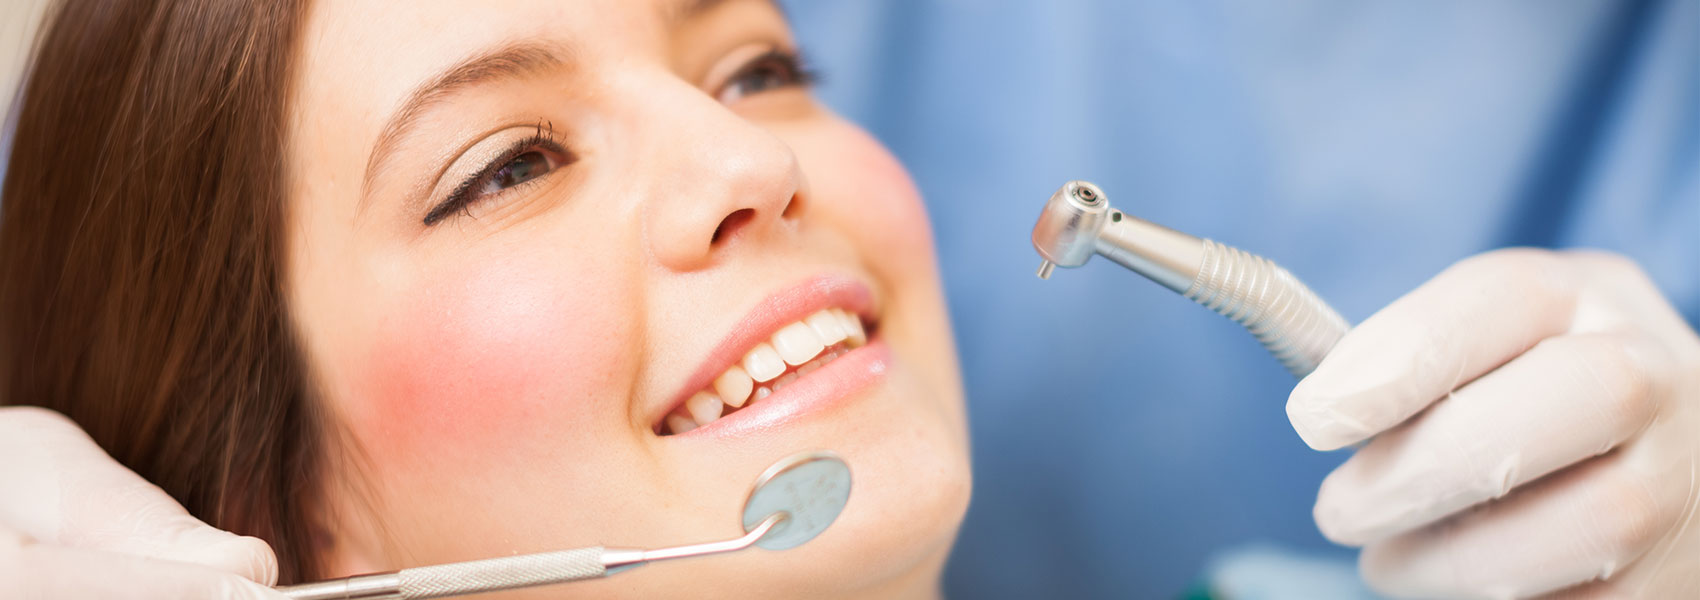 Dental cleaning process